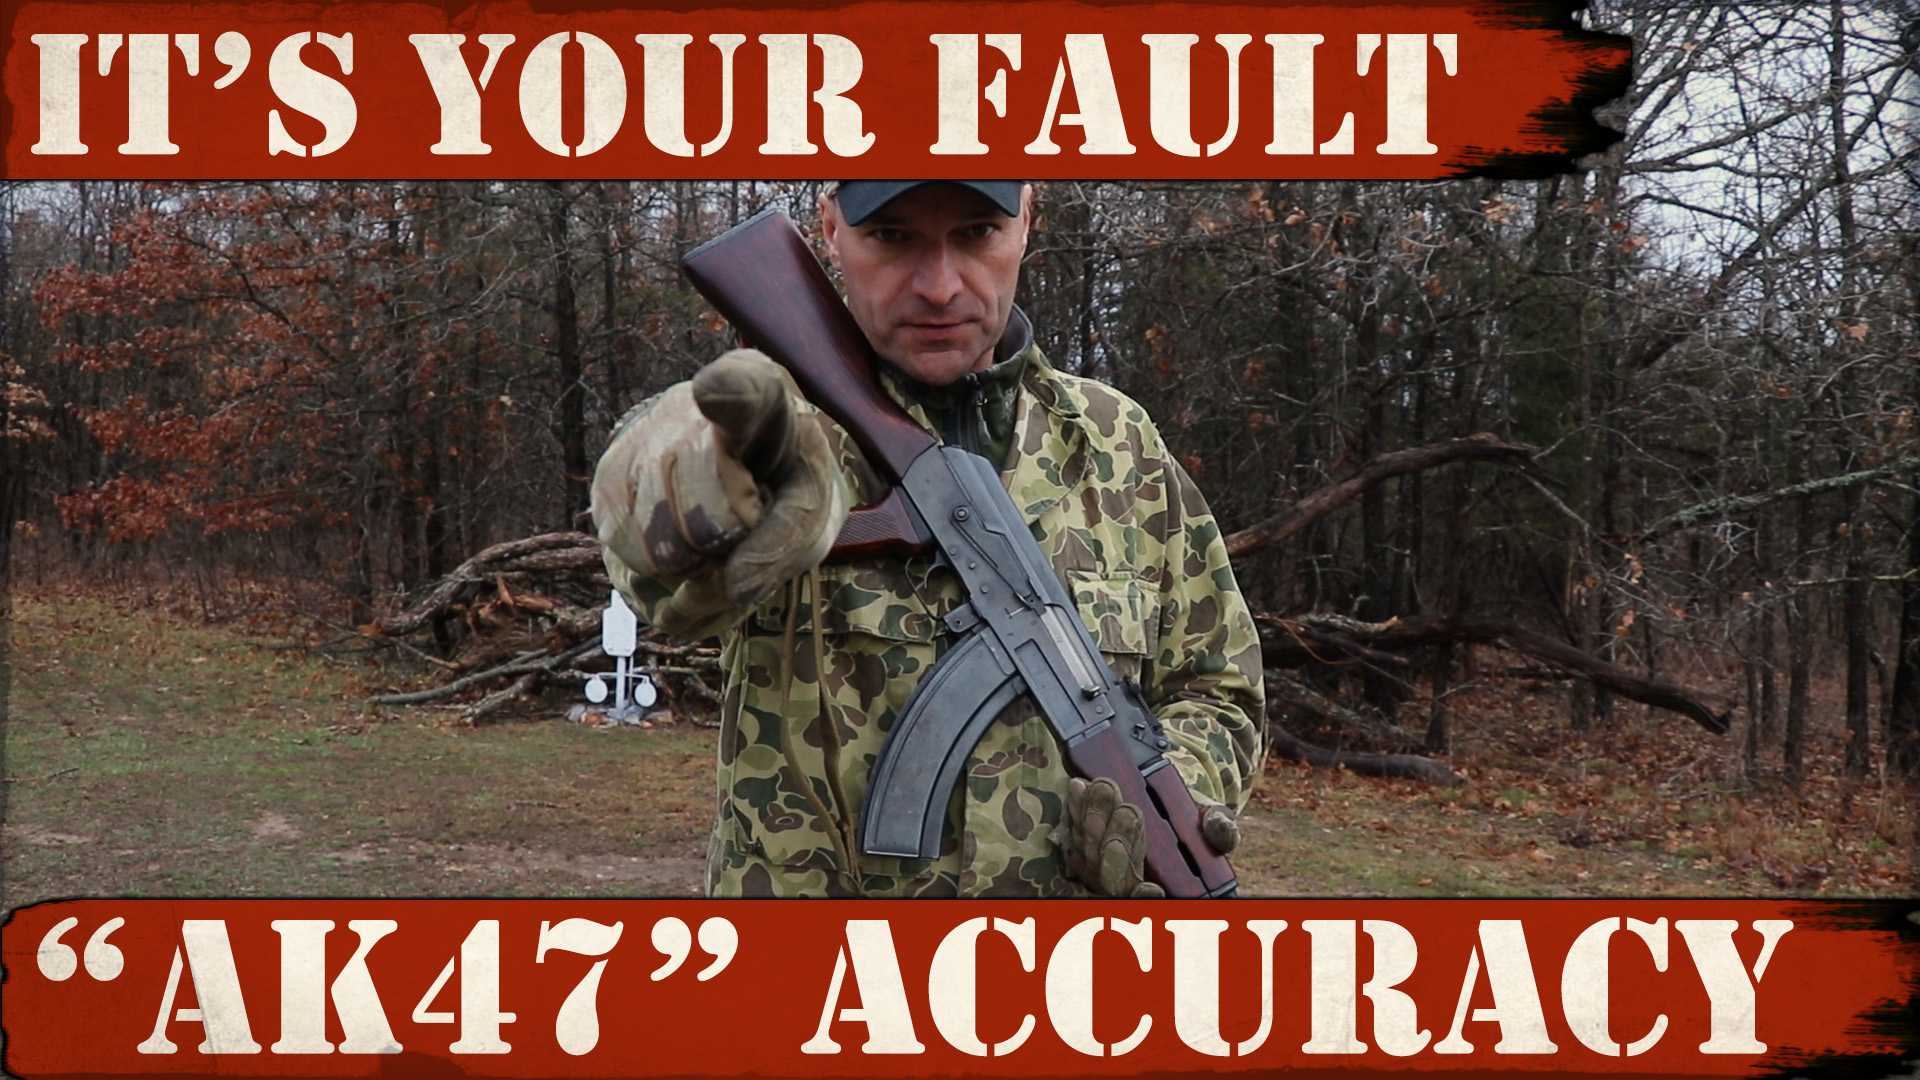 Poor “AK47” Accuracy – It’s Your Fault!